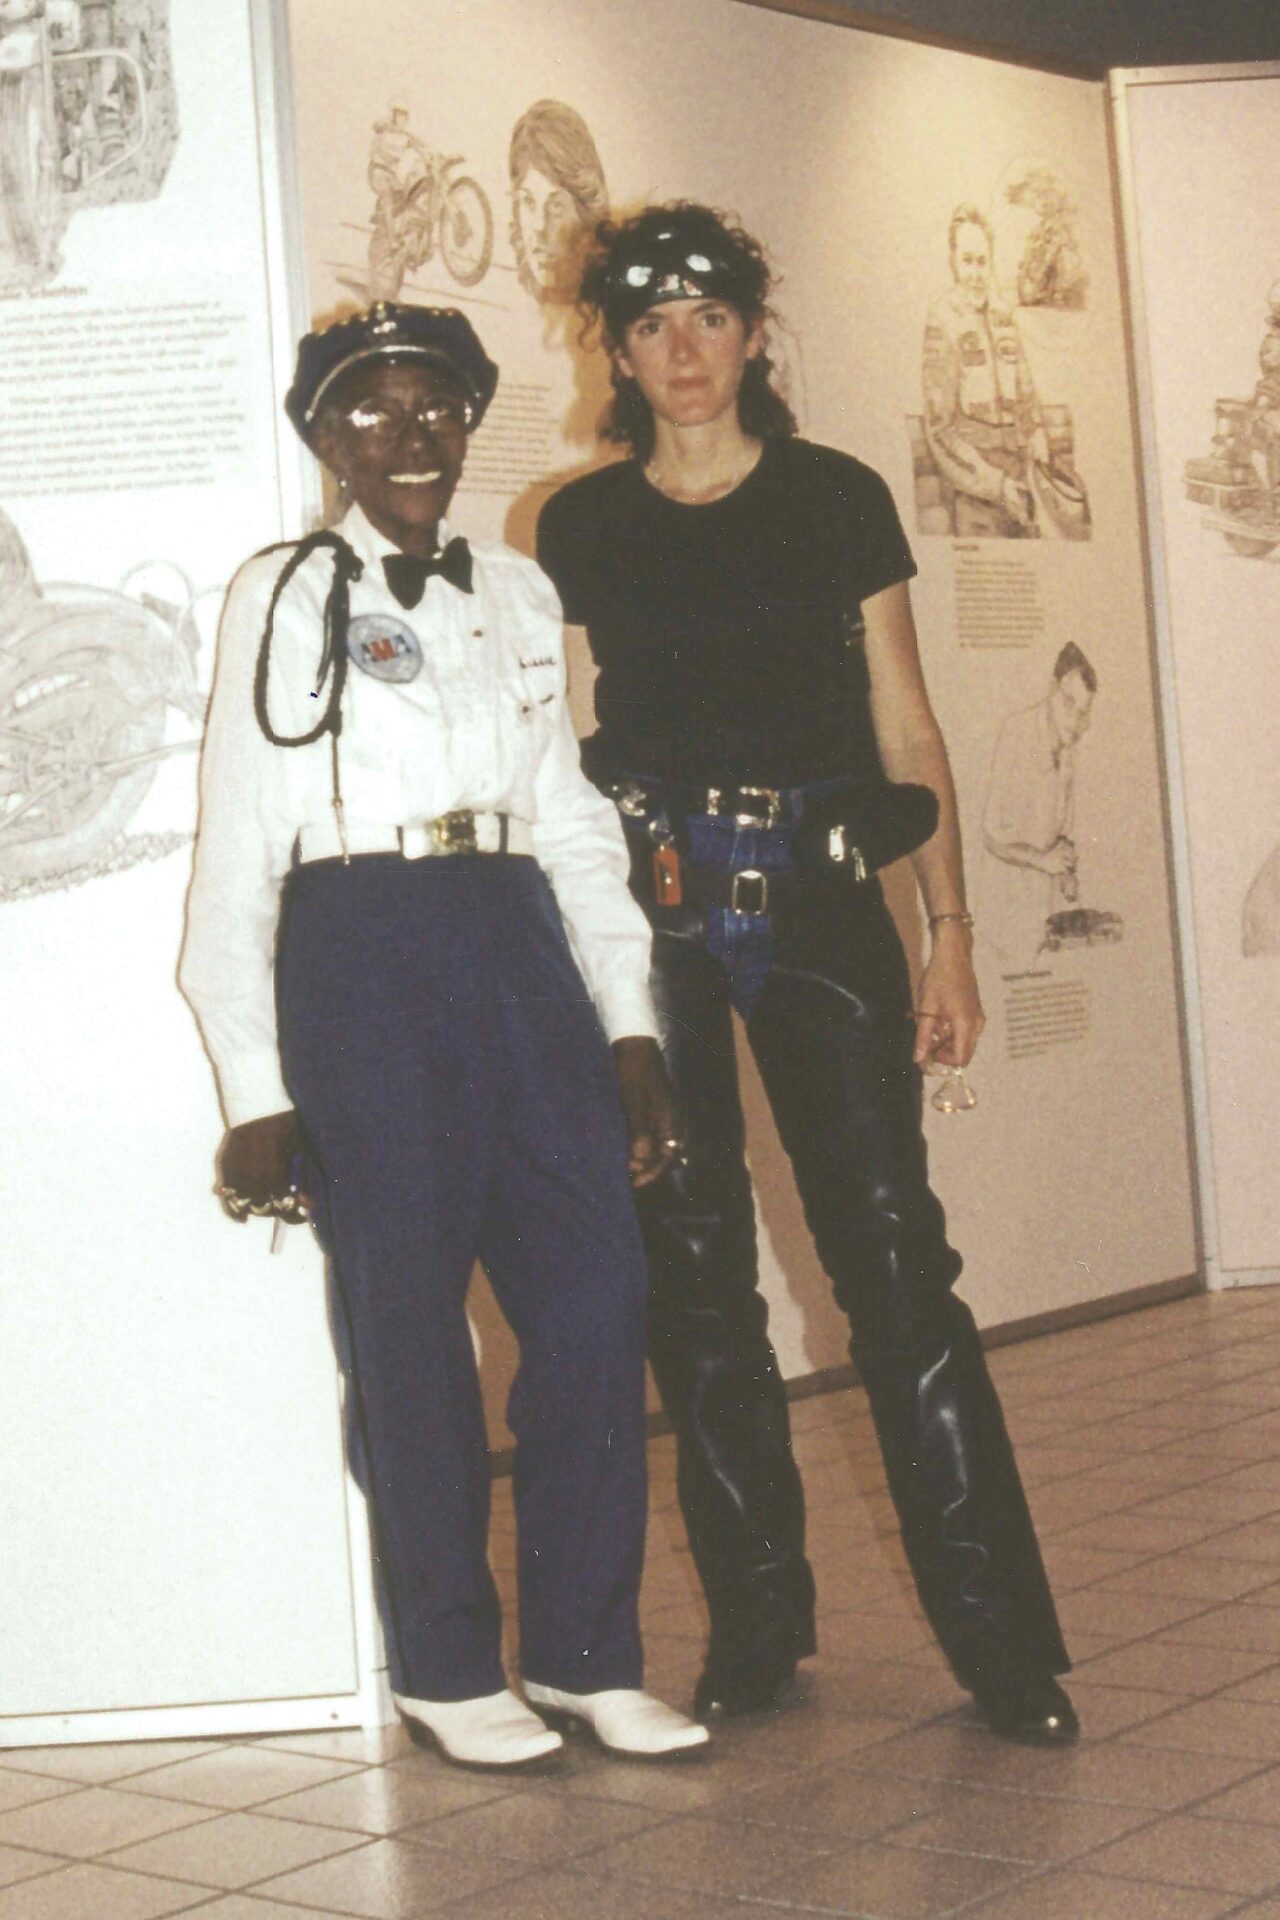 Bessie Stringfield (left) with Ann Ferrar, her biographer and friend, on the day they met in the summer of 1990. The author's coming book is <i>African American Queen of the Road: Bessie Stringfield—A Woman's Journey Through Race, Faith, Resilience and the Road </i>. Expanding on Ferrar's earlier published stories of Bessie, the book is Stringfield's definitive biography. Bessie kept this photo on top of her old box TV set in her Miami home. Ann still keeps her copy above her writing desk. Photo by Becky Brown, Founder, Women in the Wind.